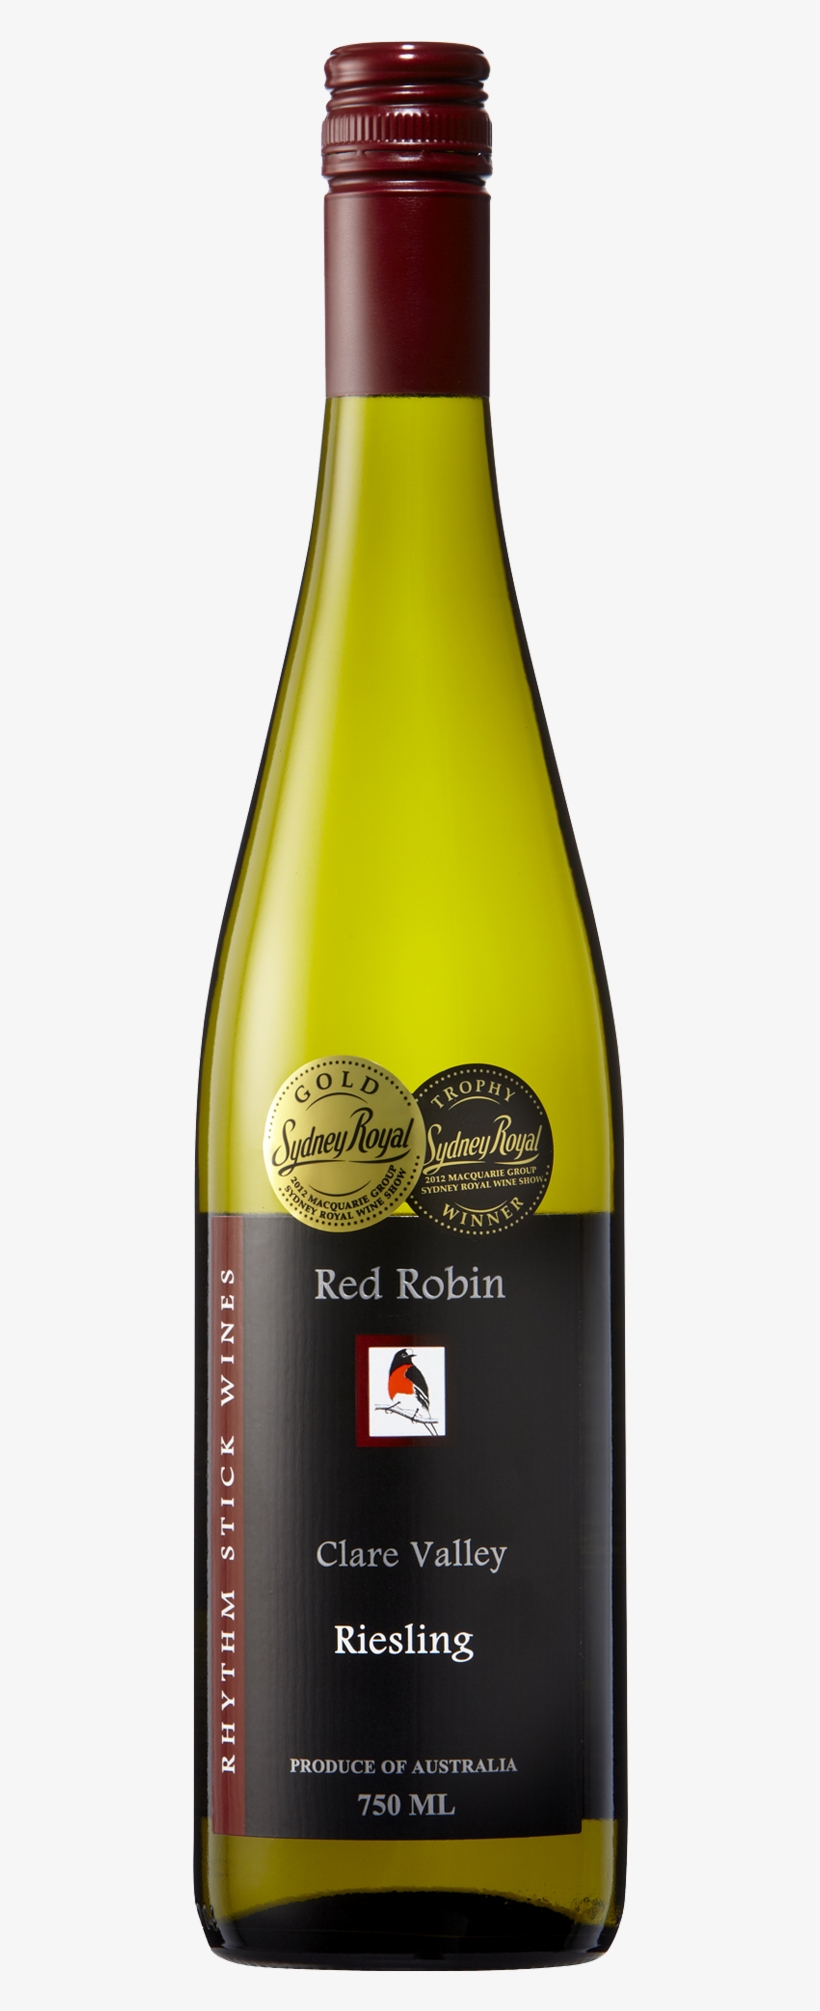 Details About Rhythm Stick Wines Red Robin Riesling - Spy Valley Sauvignon Blanc 2017, transparent png #7682259